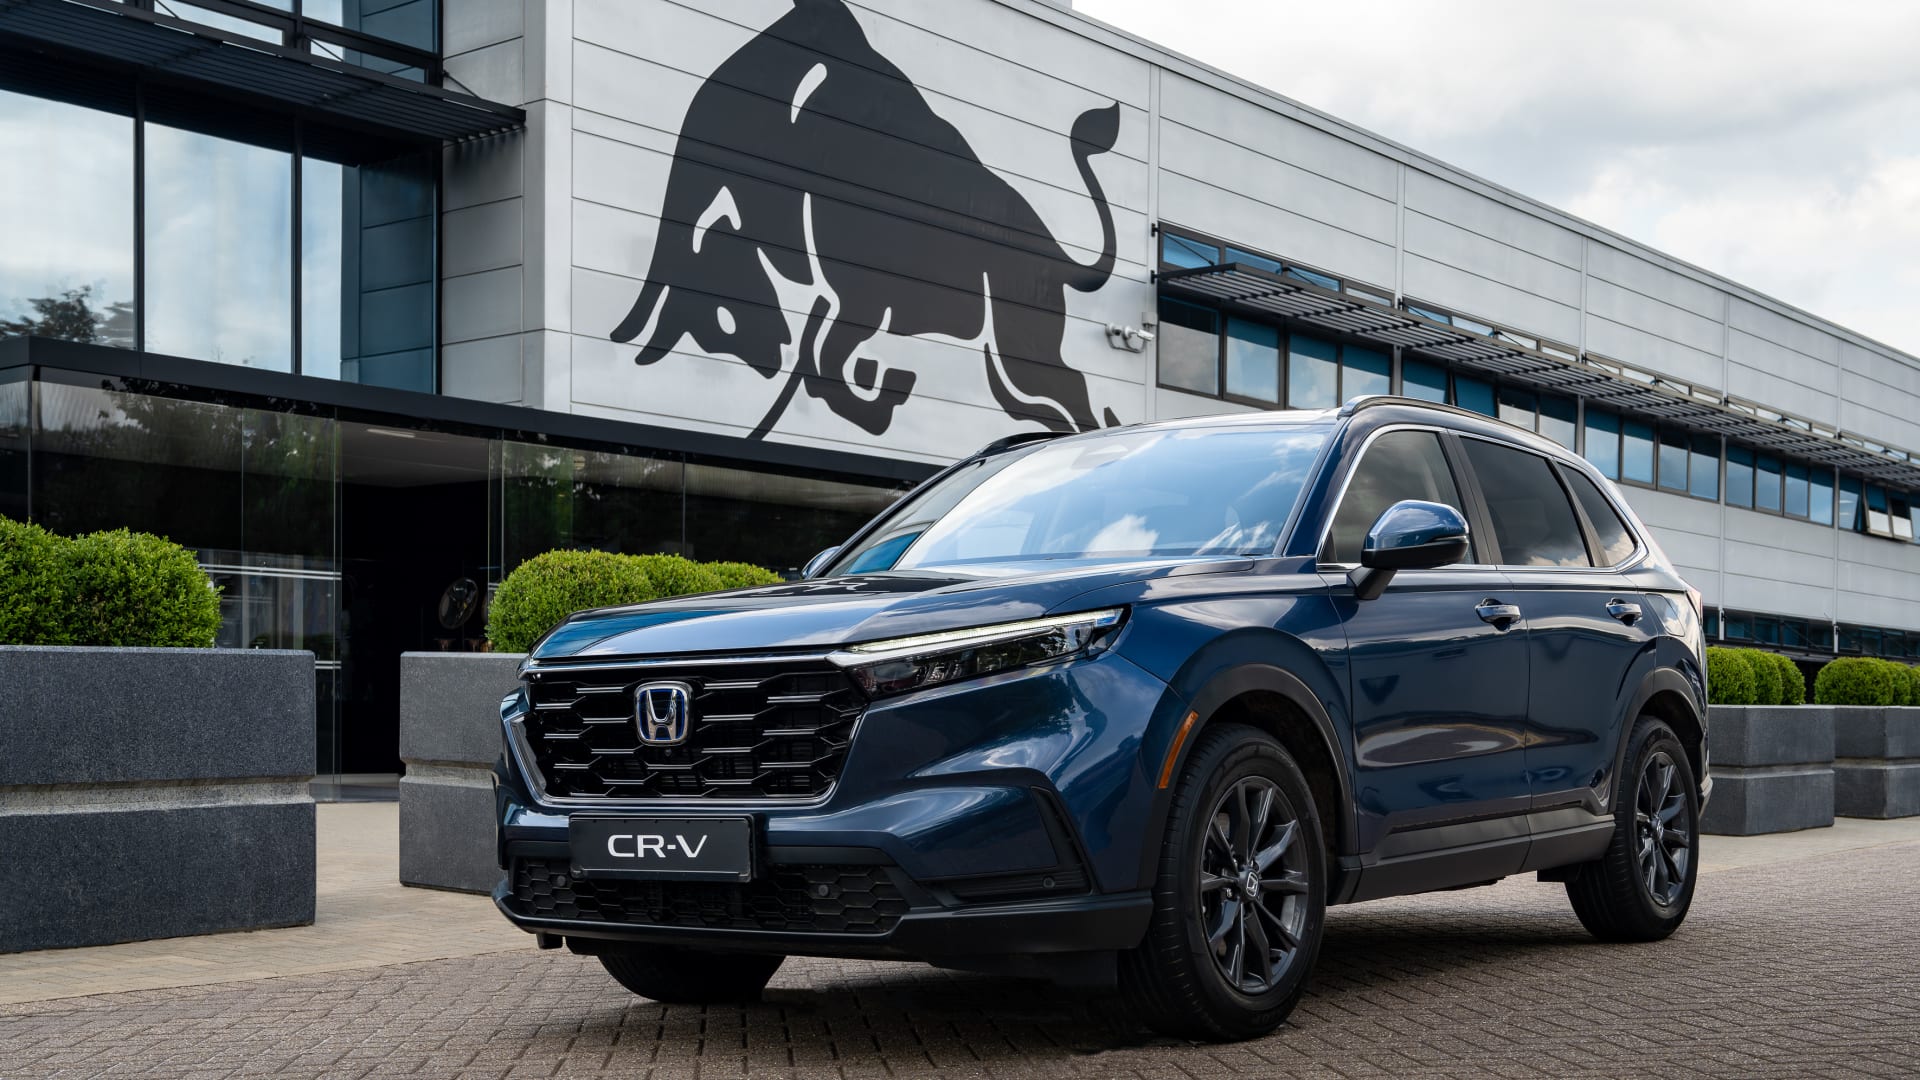 CR-V from £449 per month